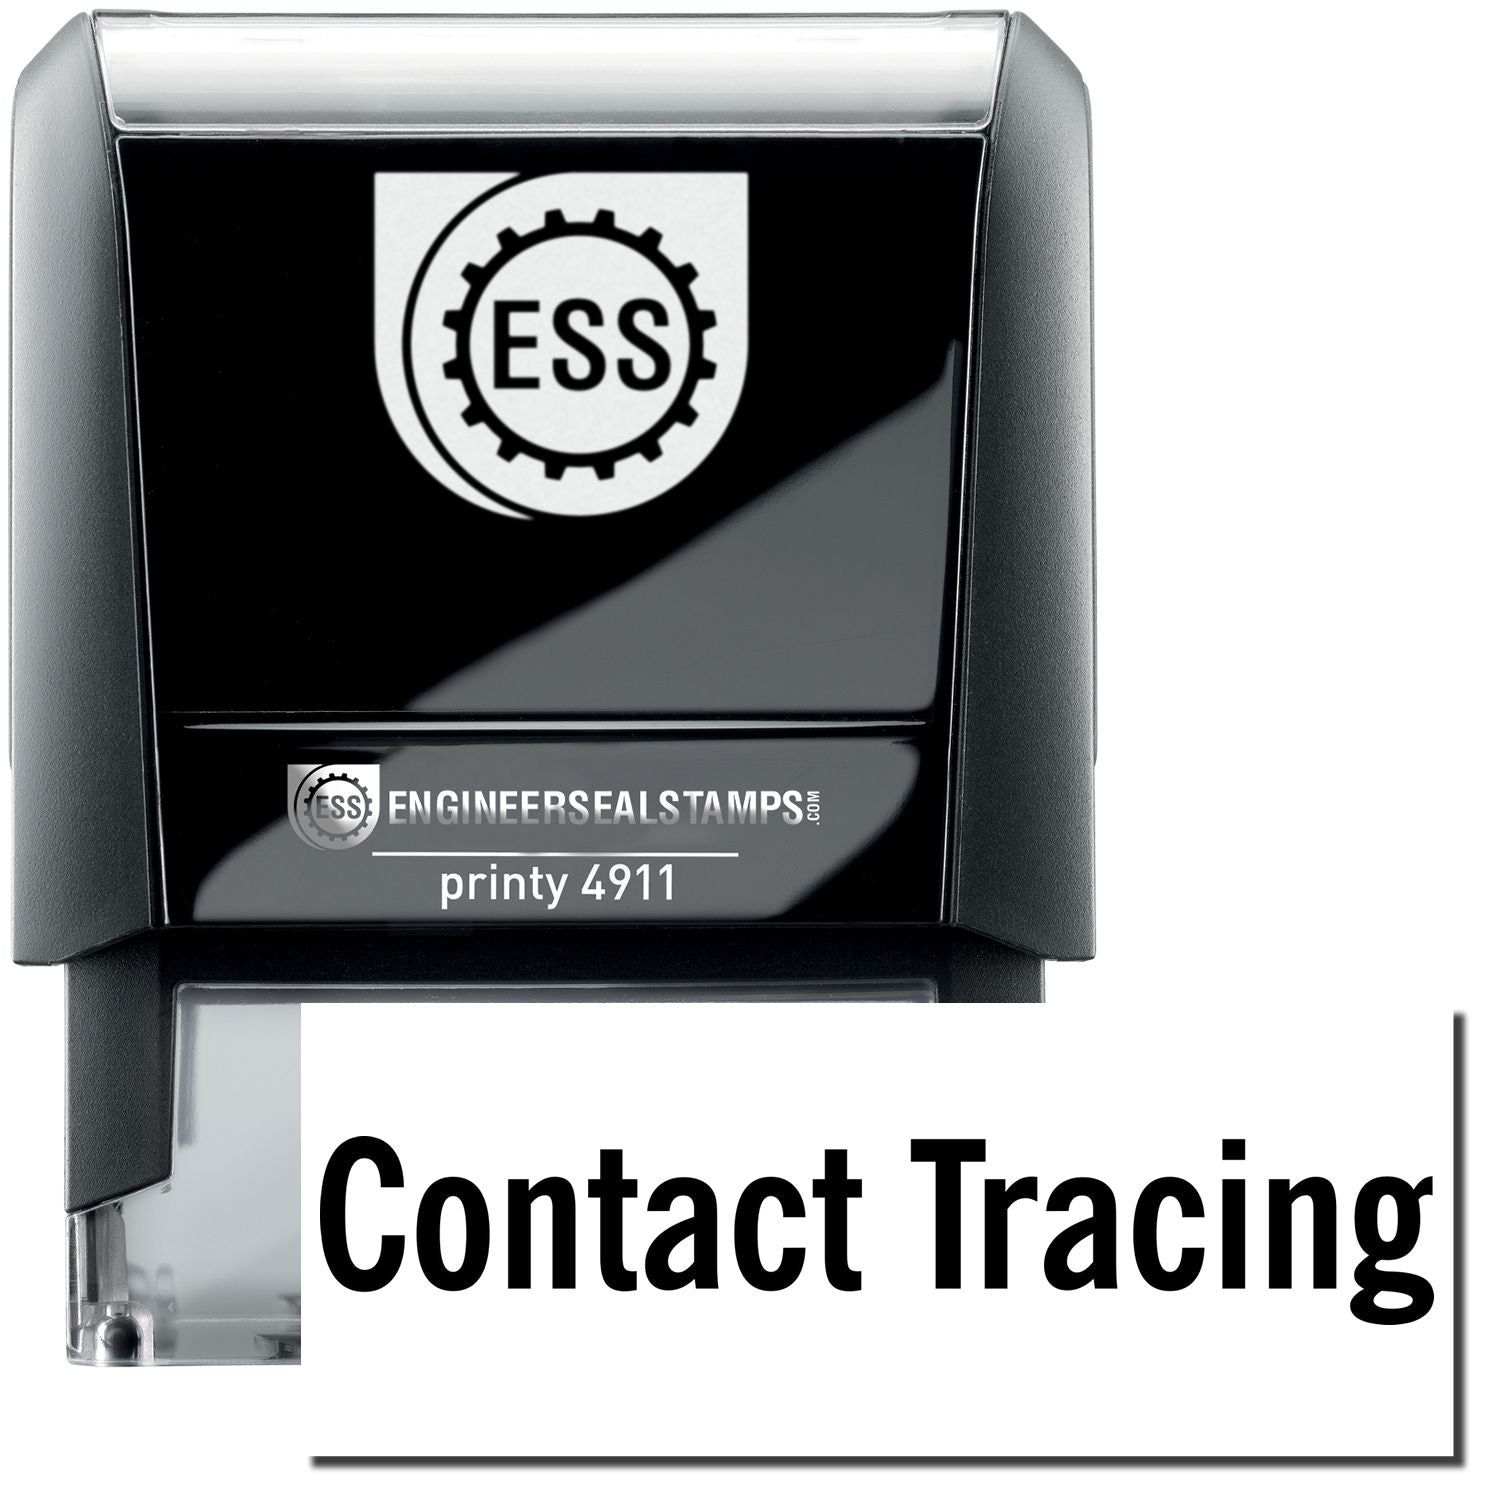 A self-inking stamp with a stamped image showing how the text "Contact Tracing" is displayed after stamping.